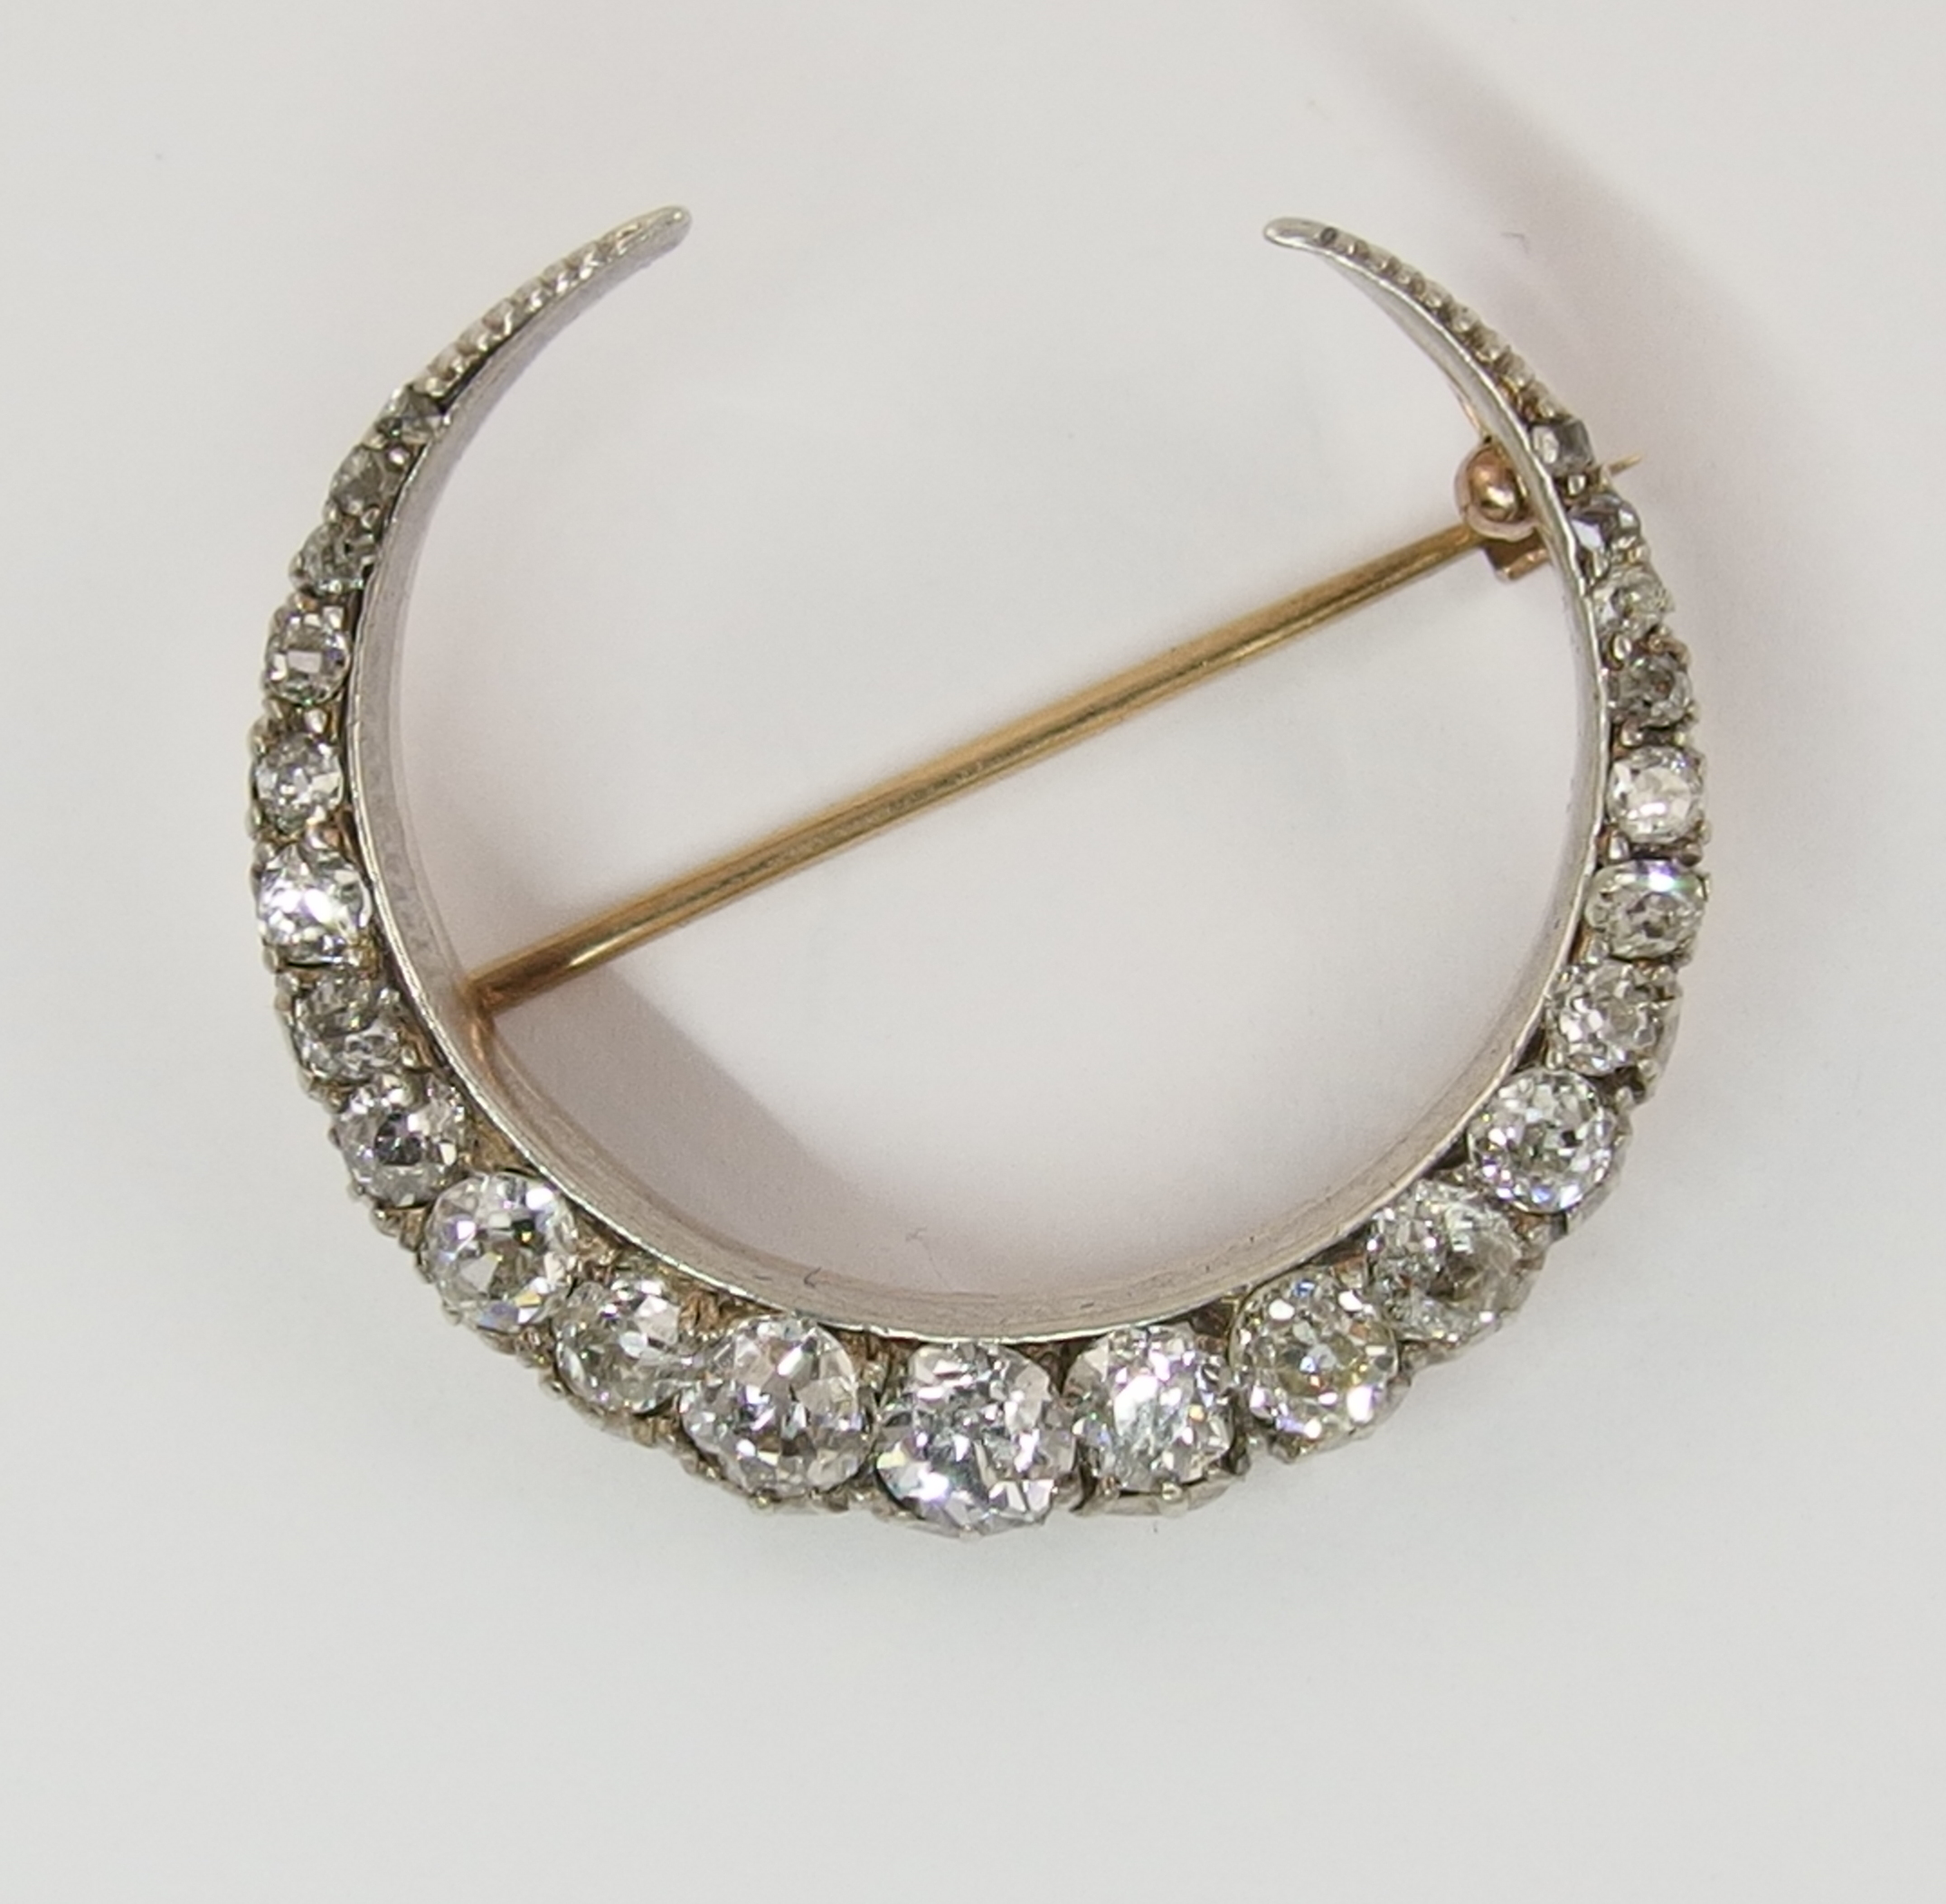 A Victorian diamond crescent moon brooch set with approximately 1.80cts of old cut diamonds in an